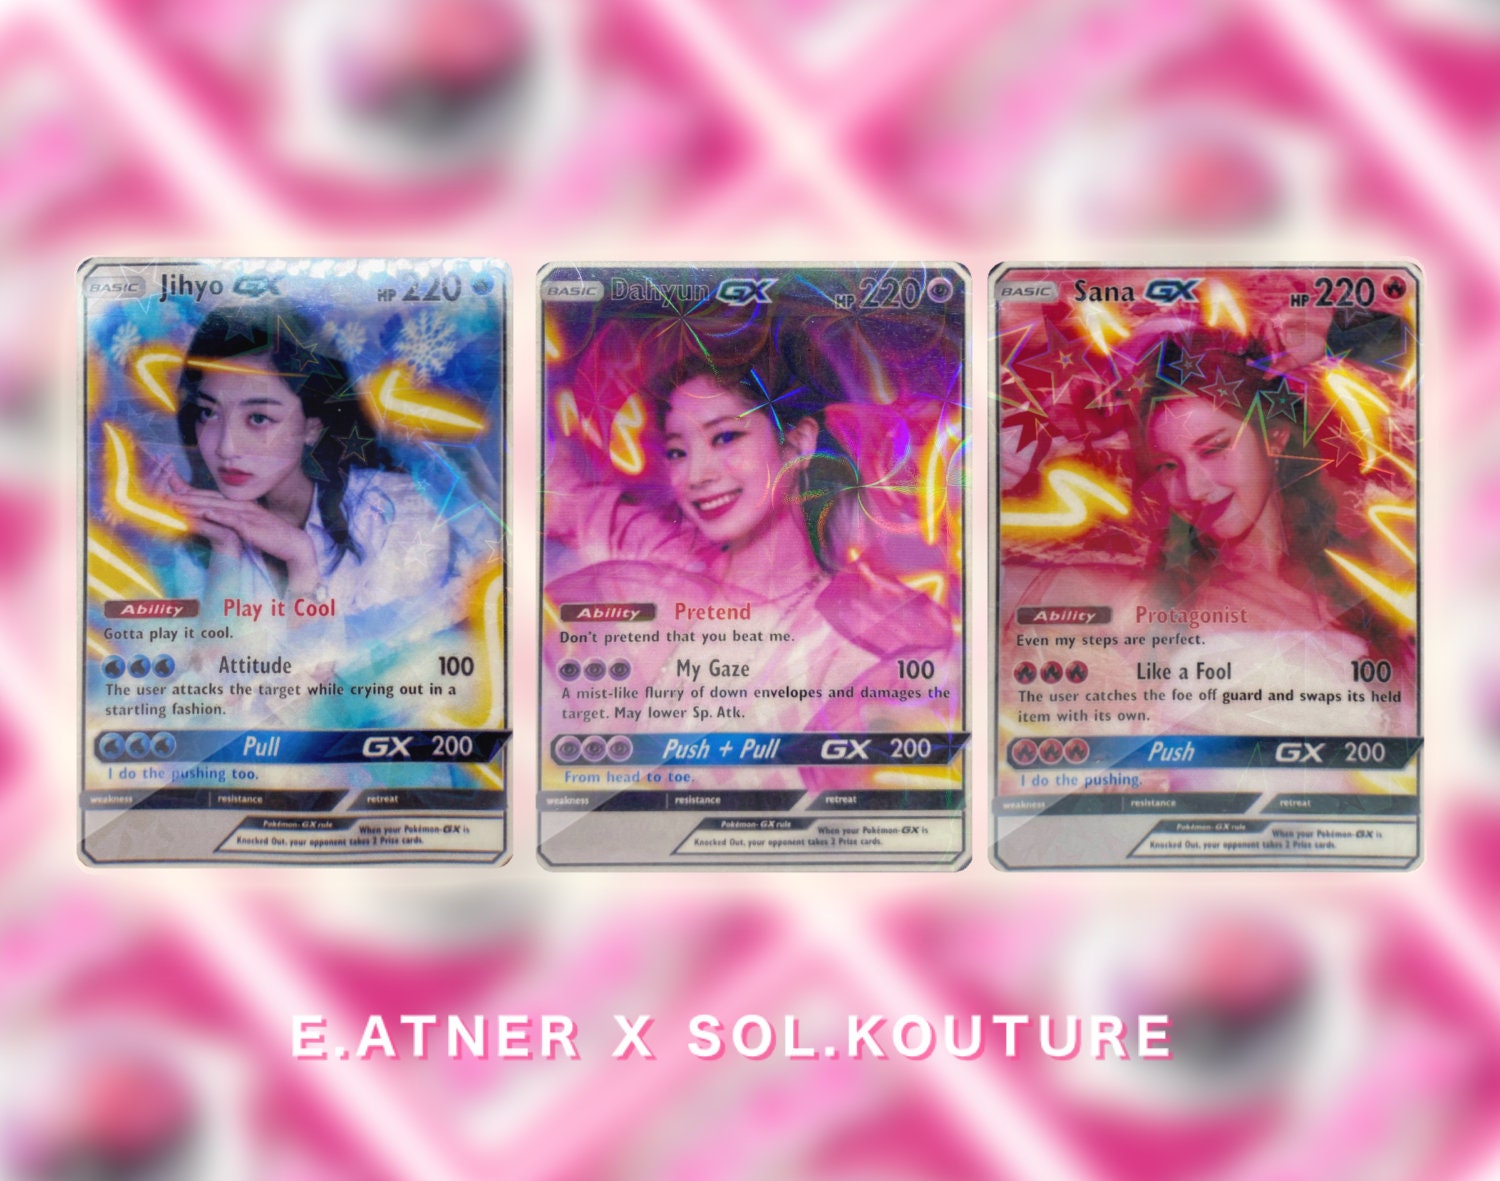 TWICE Holo Idol Trading Cards Push and Pull Formula of Love